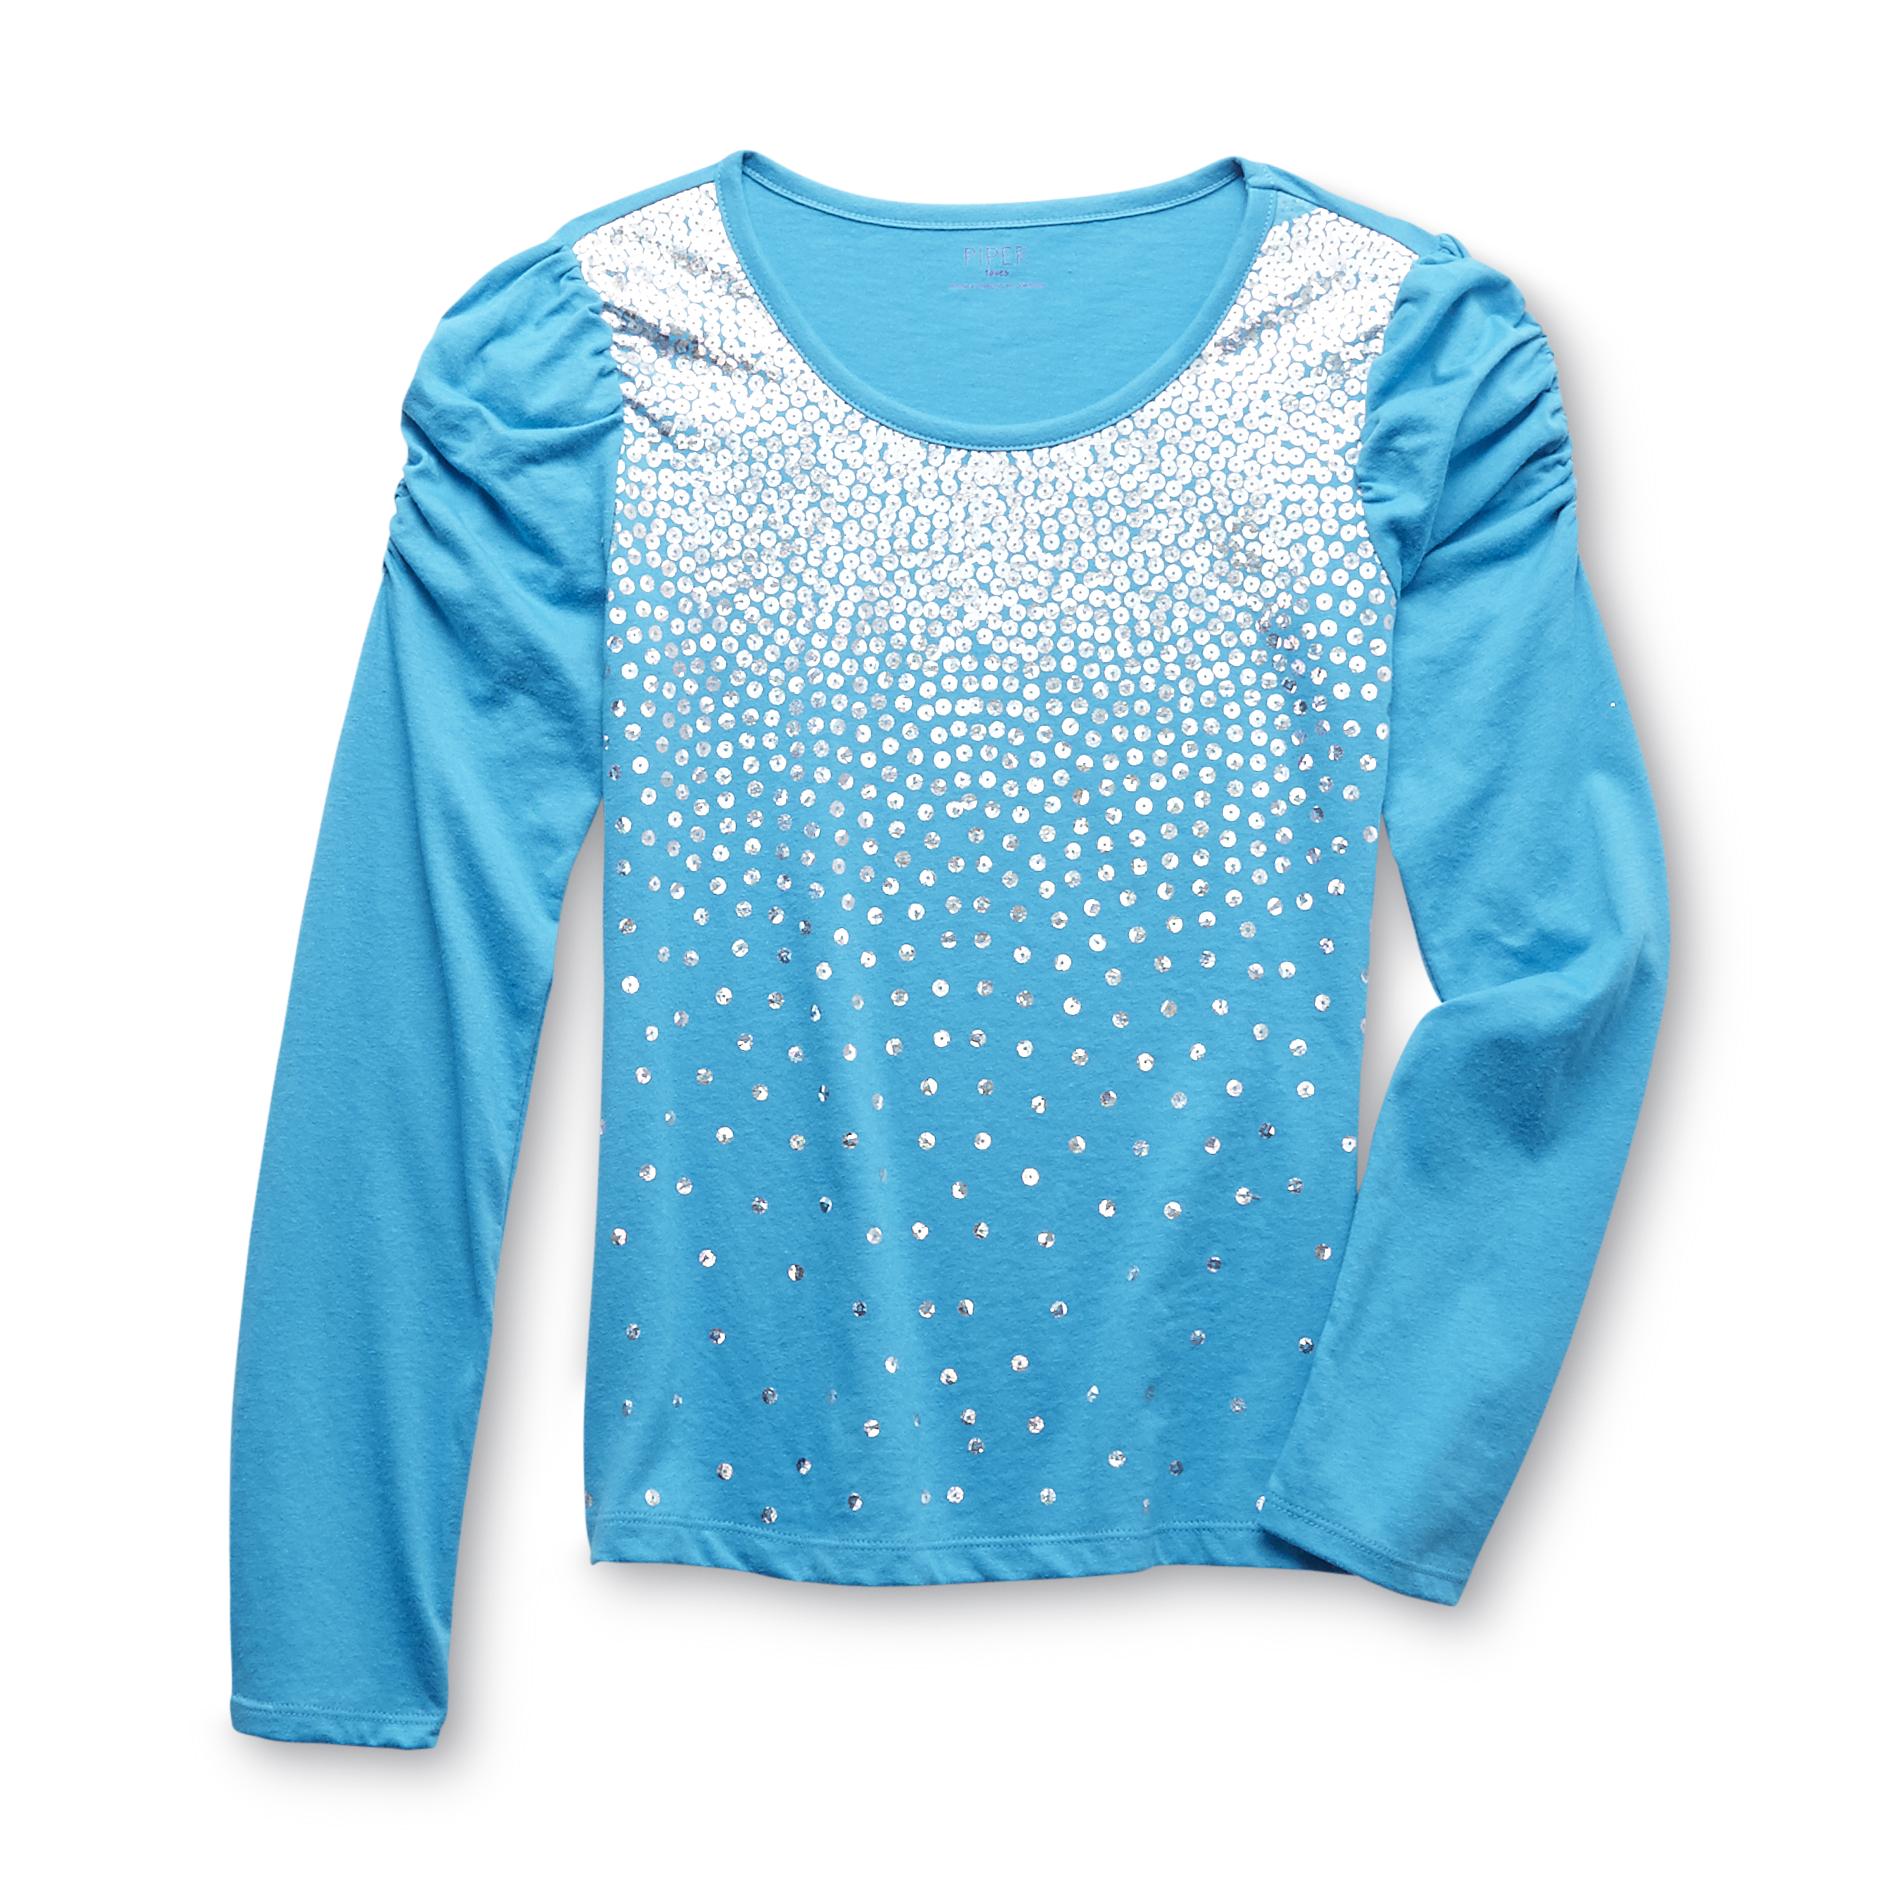 Piper Faves Girl's Foil-Print Long-Sleeve Top